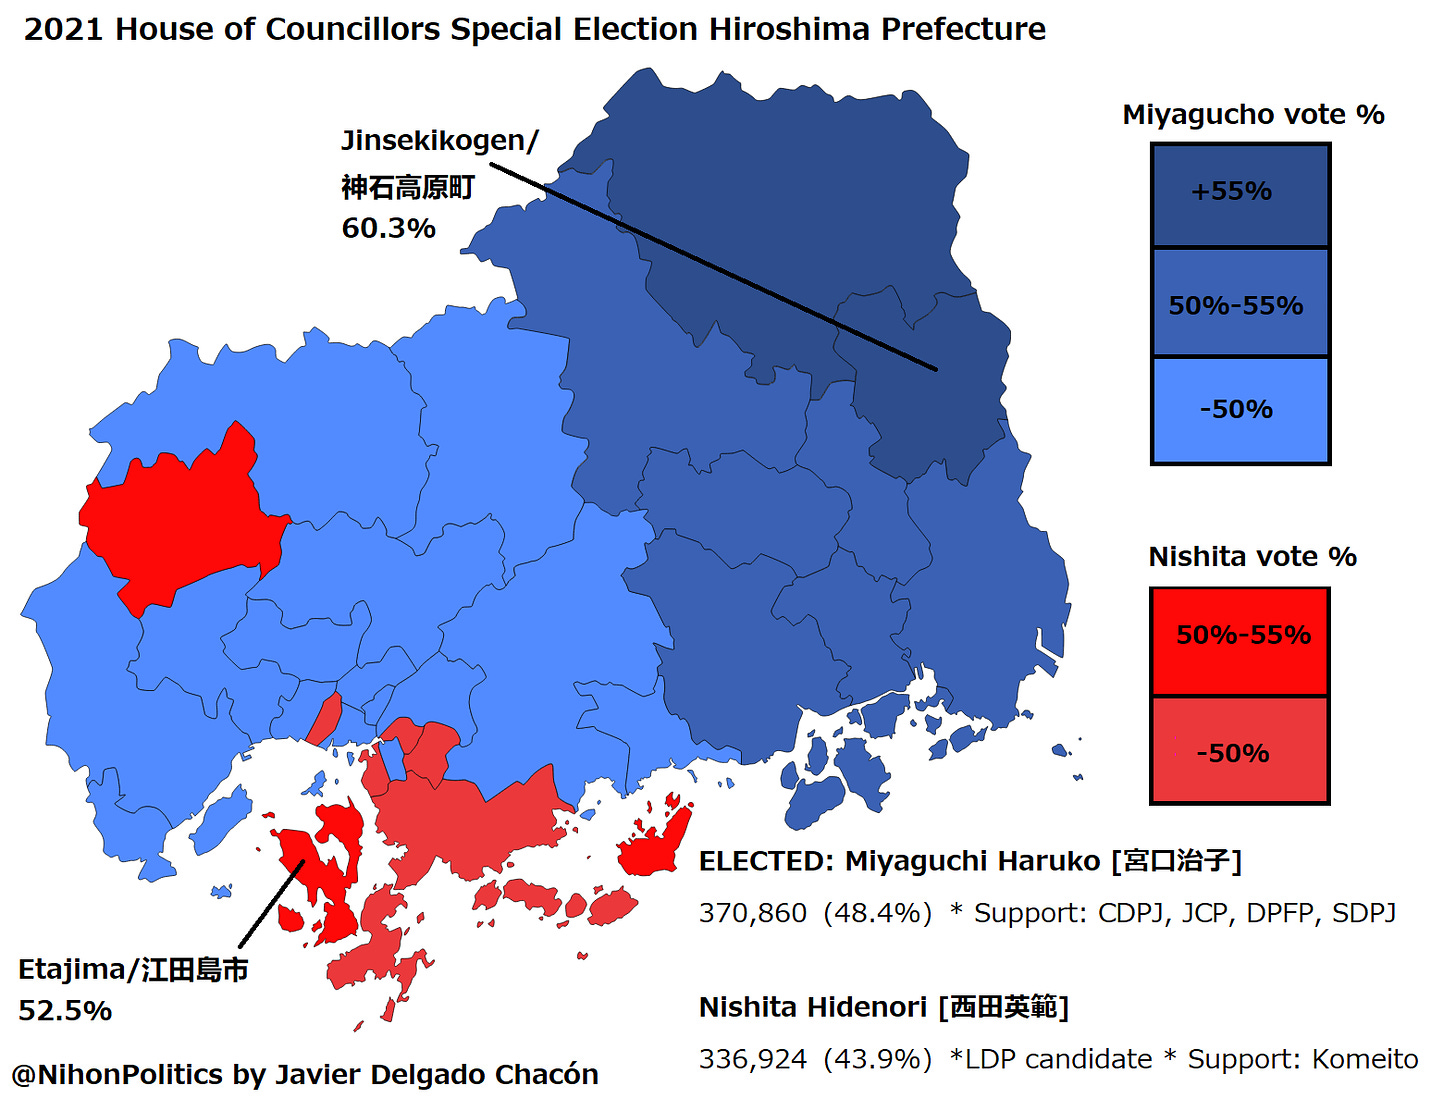 2021 Hiroshima Prefecture HoC Special Election results